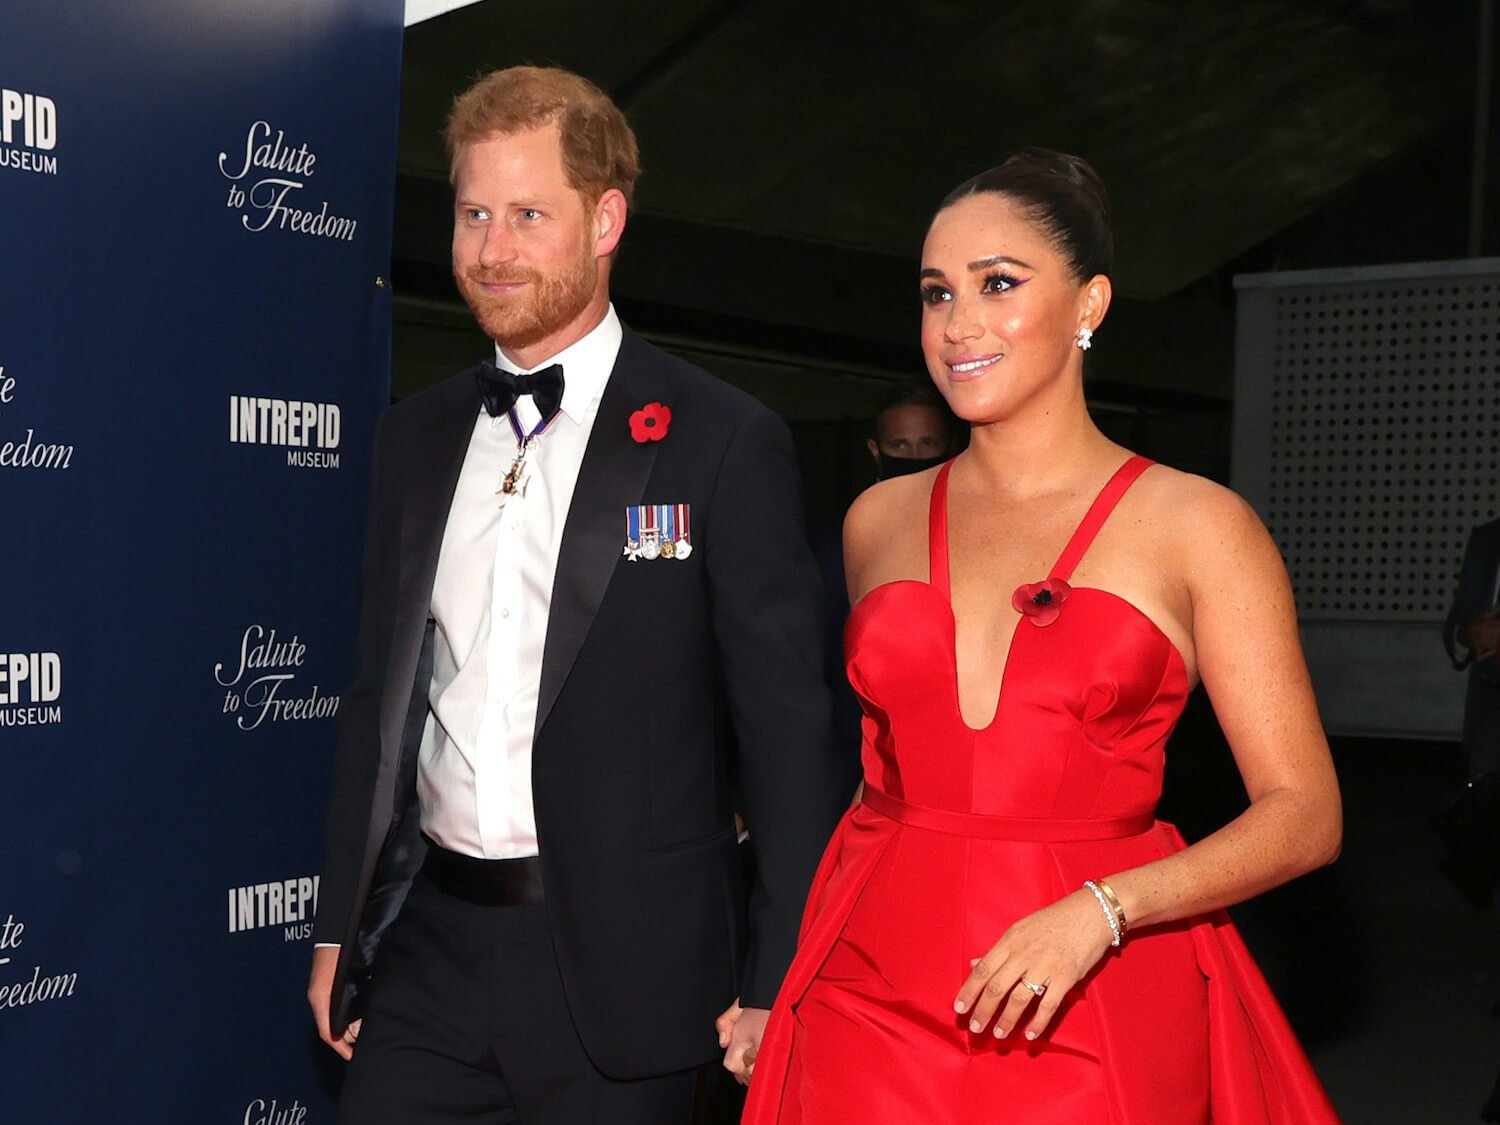 Prince Harry wears a tux while holding hands with Meghan Markle, who is wearing a red dress.